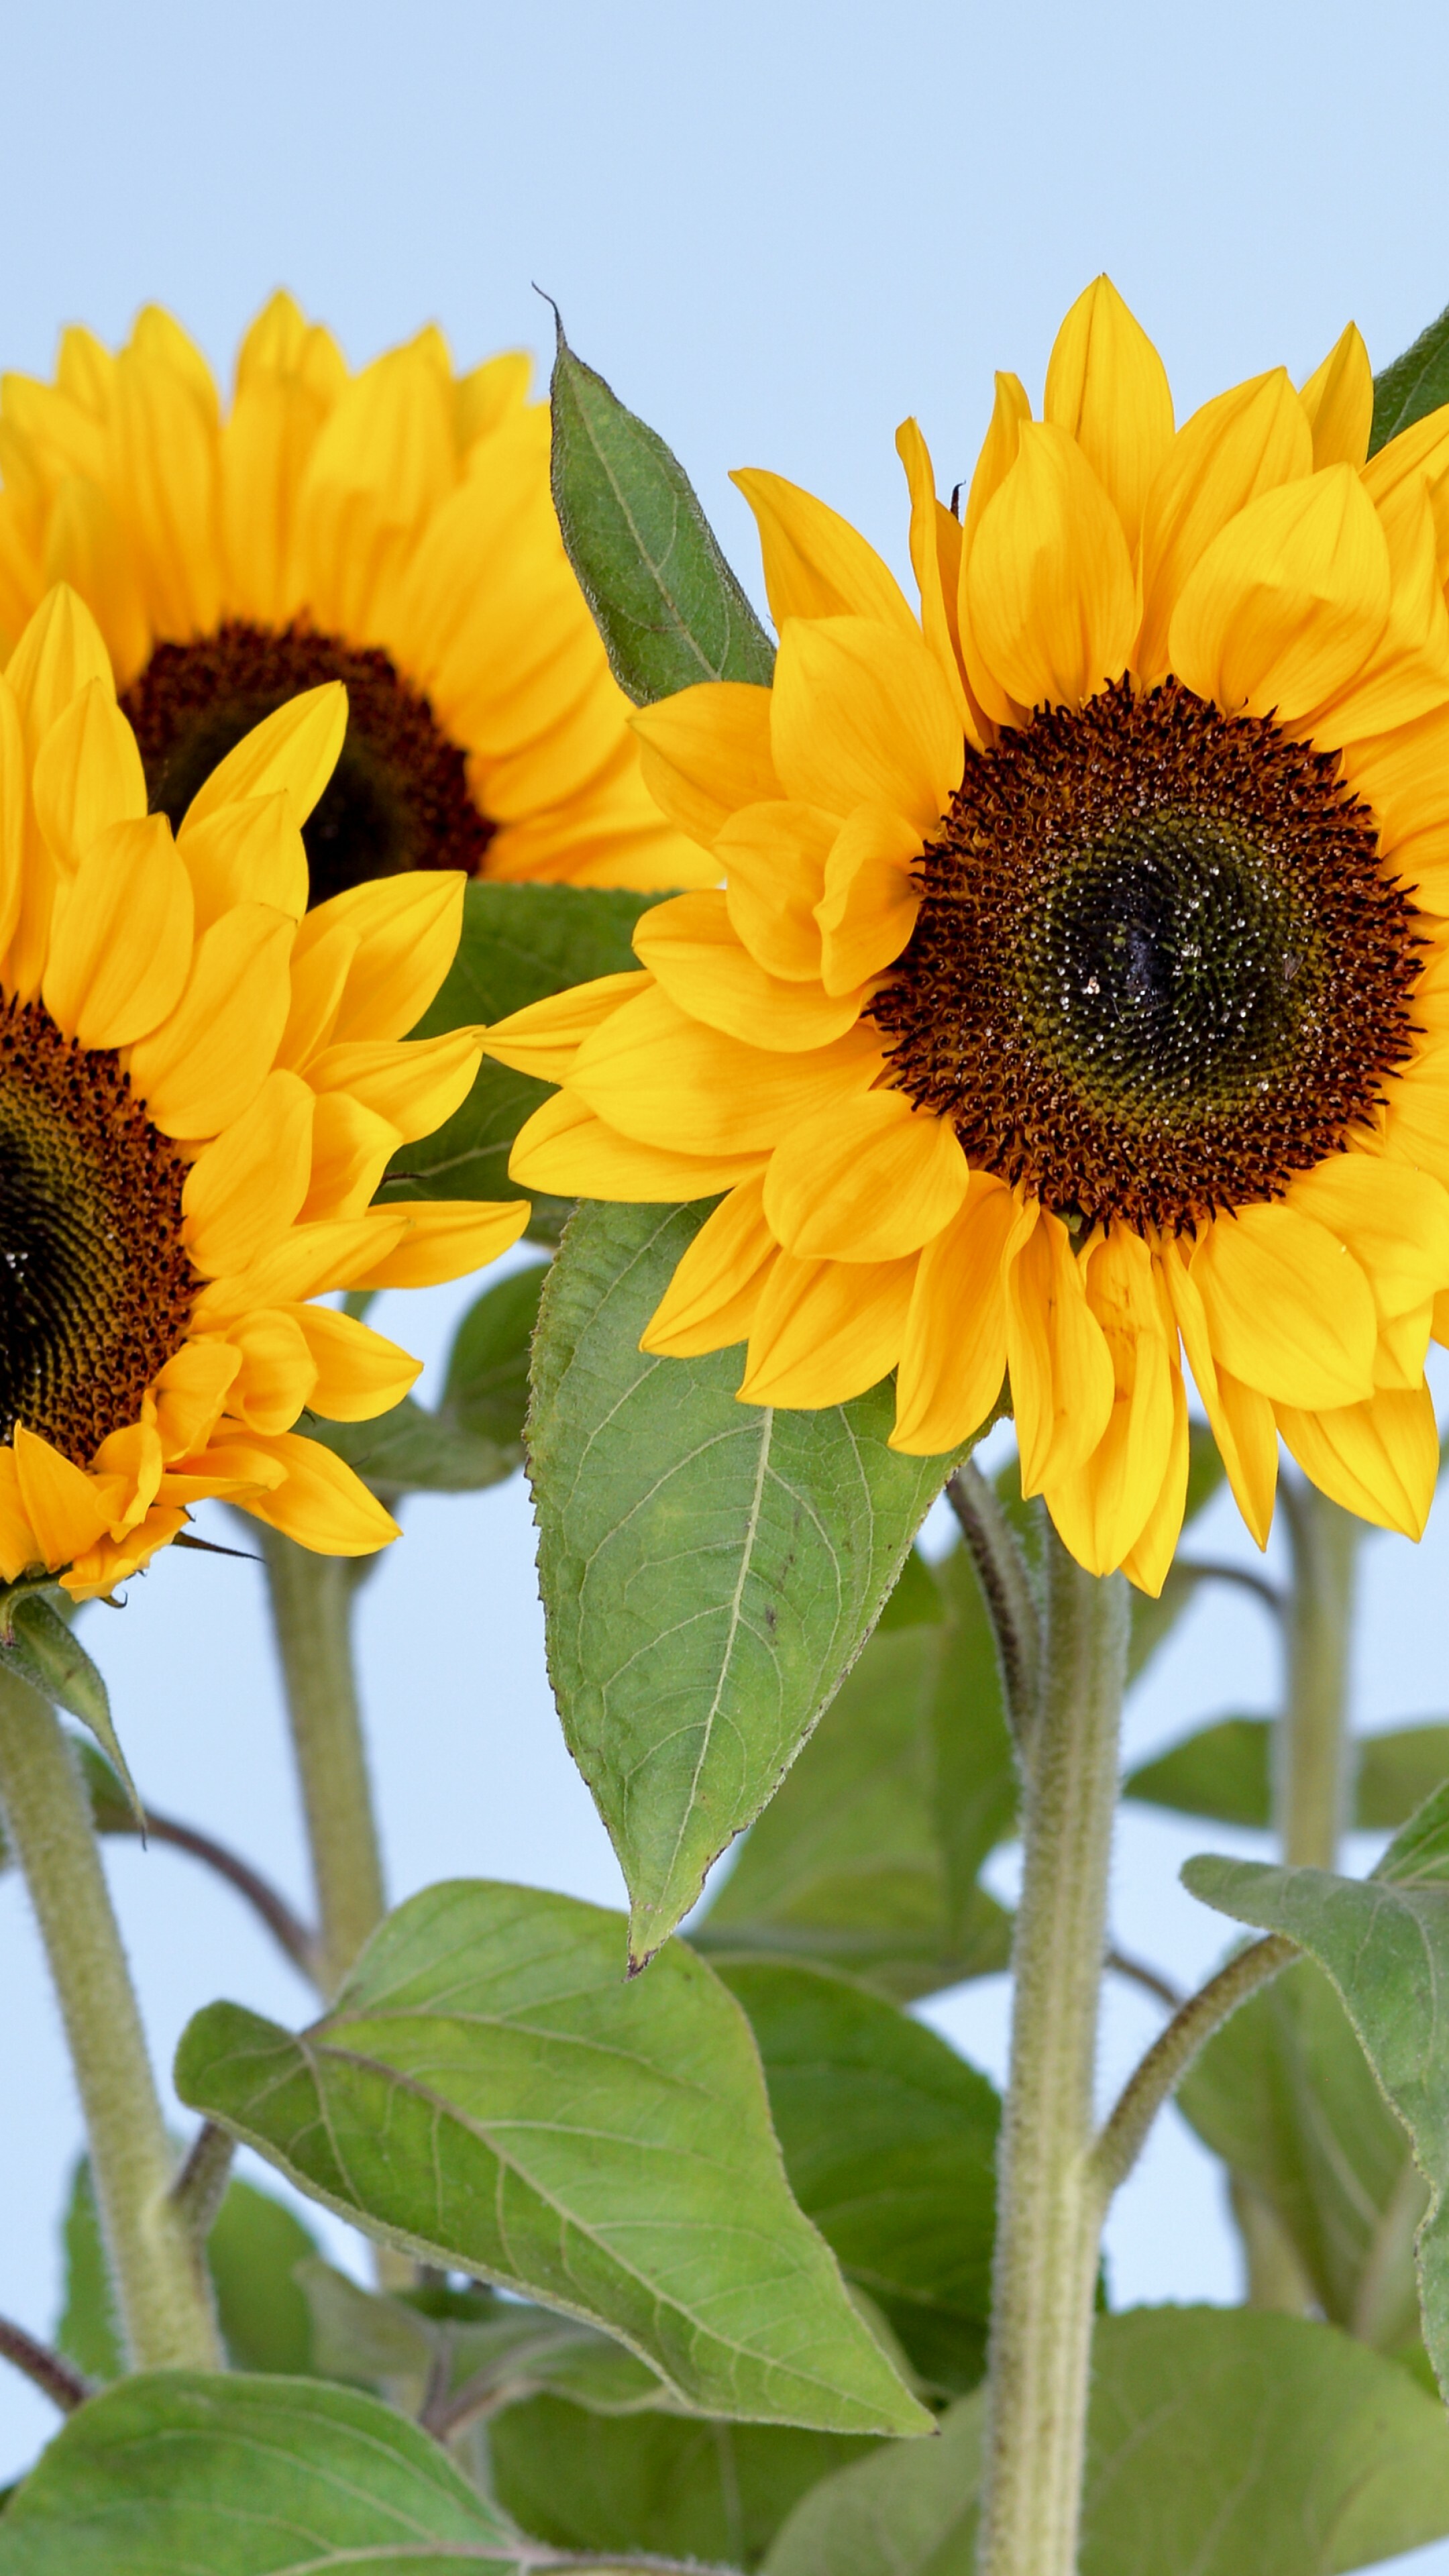 Sunflower: Wild Helianthus annuus is a widely branched annual plant with many flower heads. 2160x3840 4K Background.